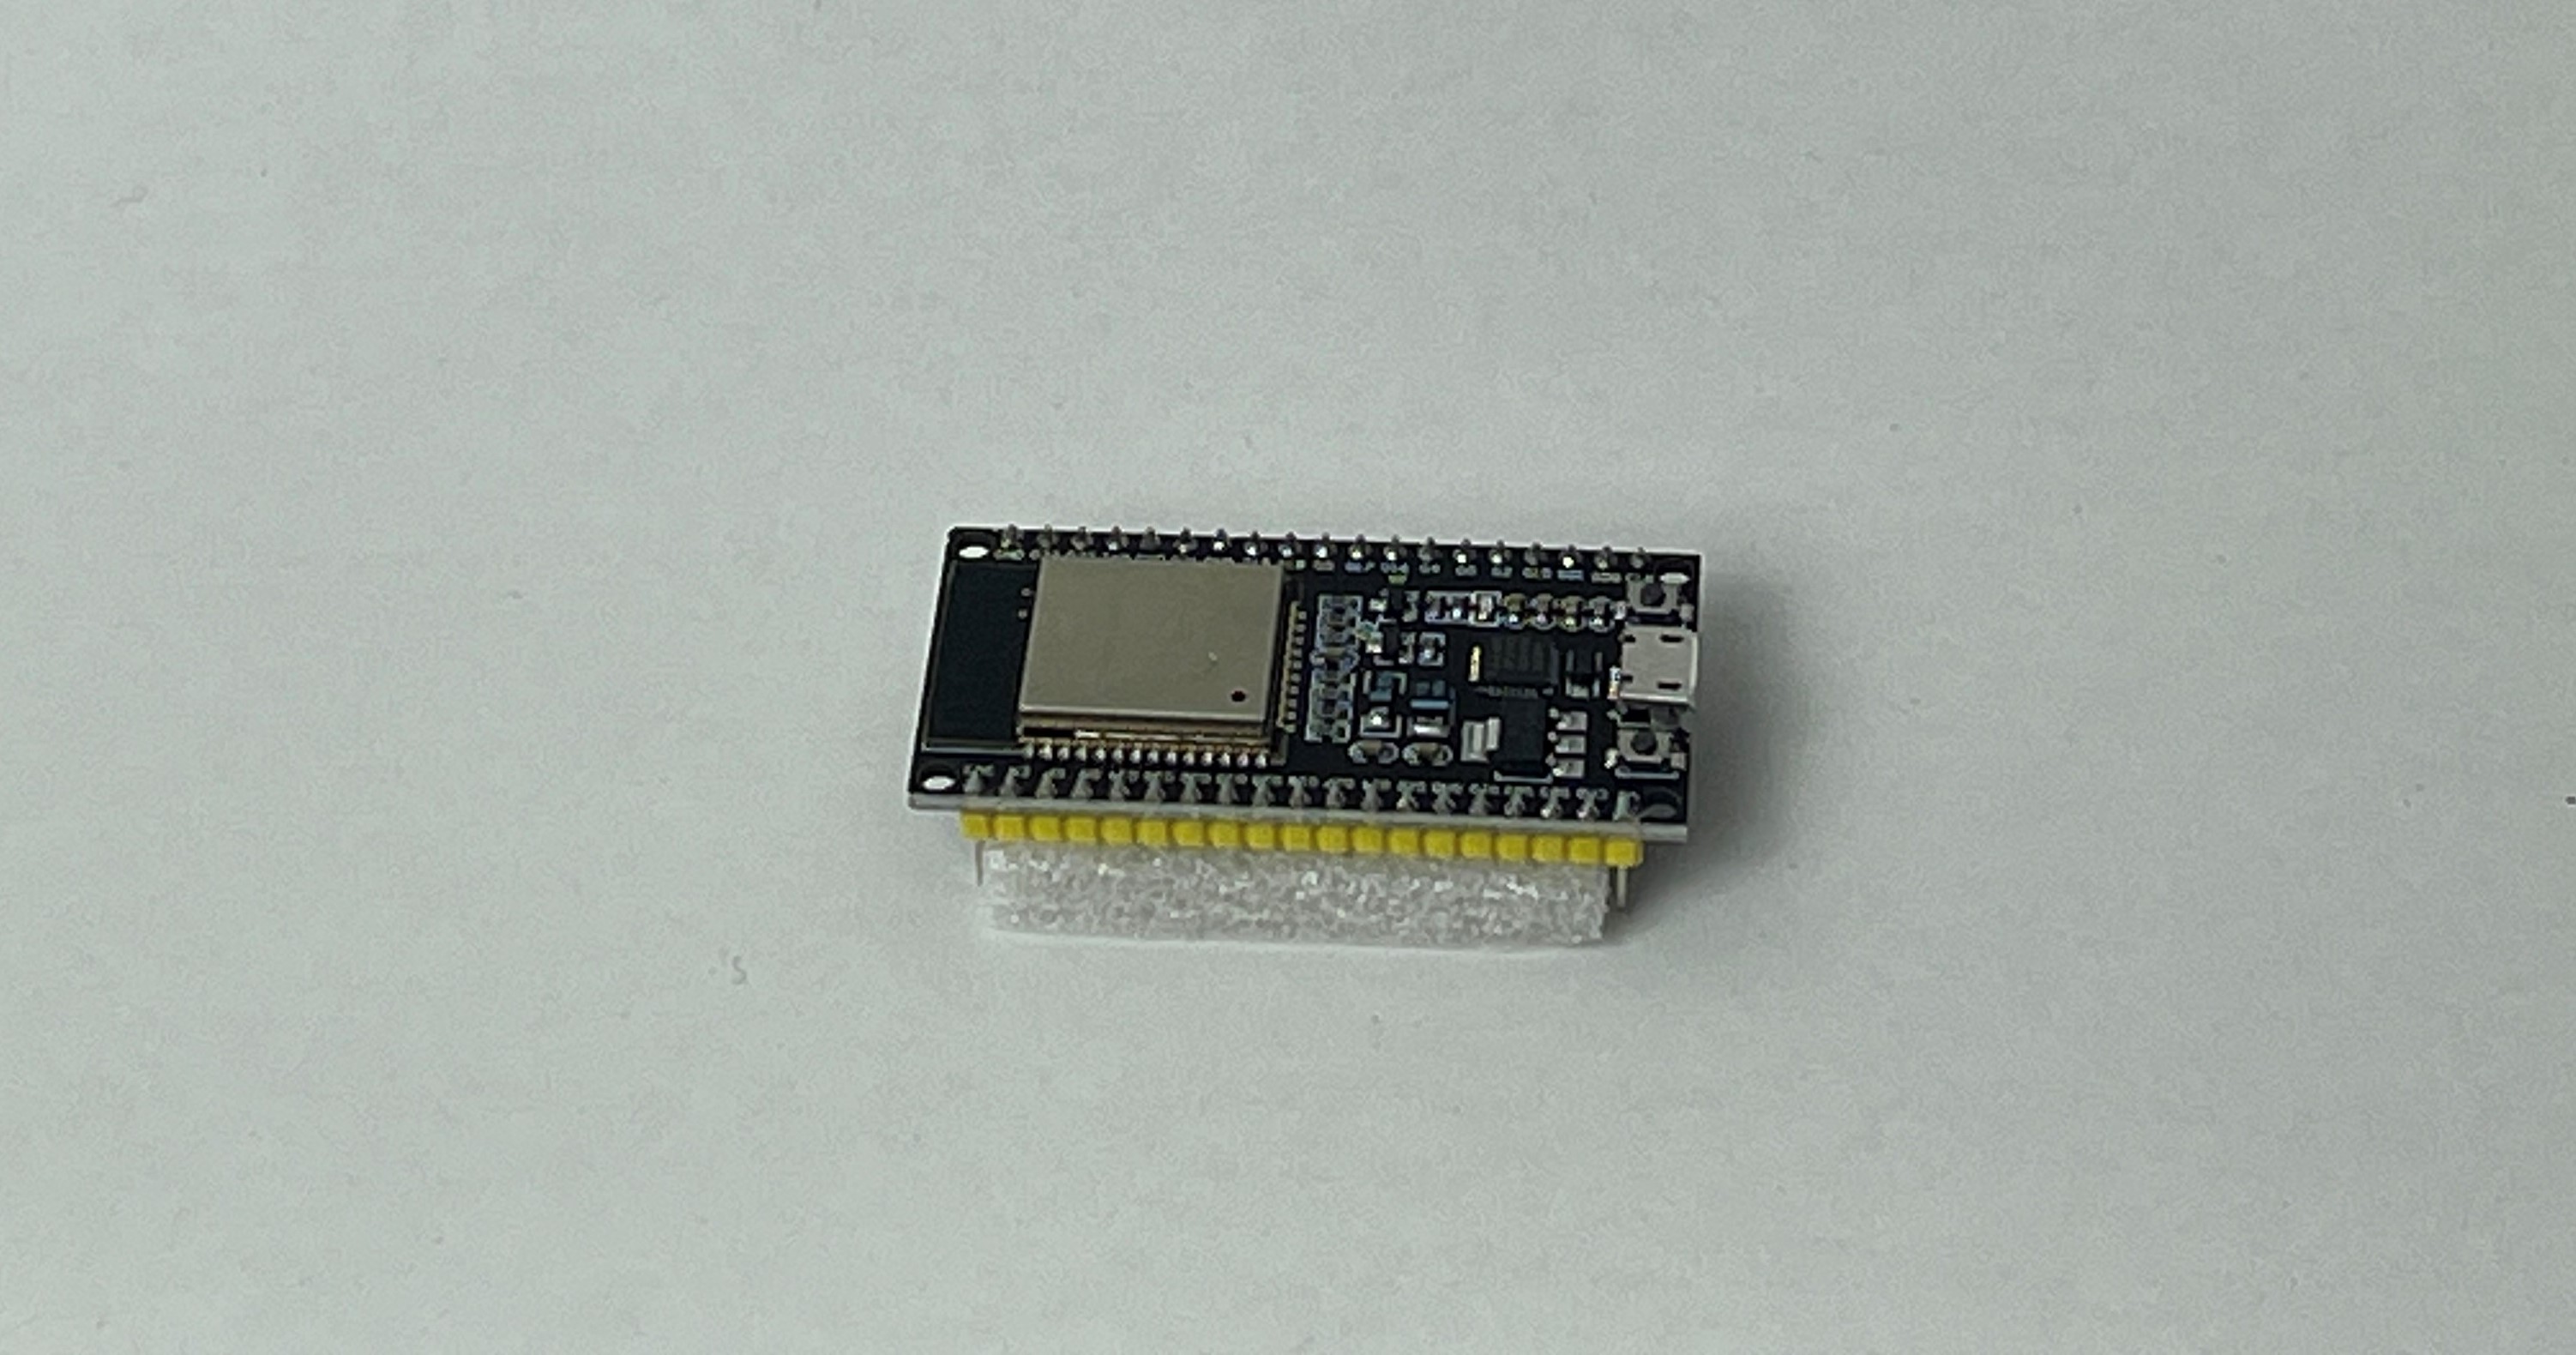 Picture of the ESP32